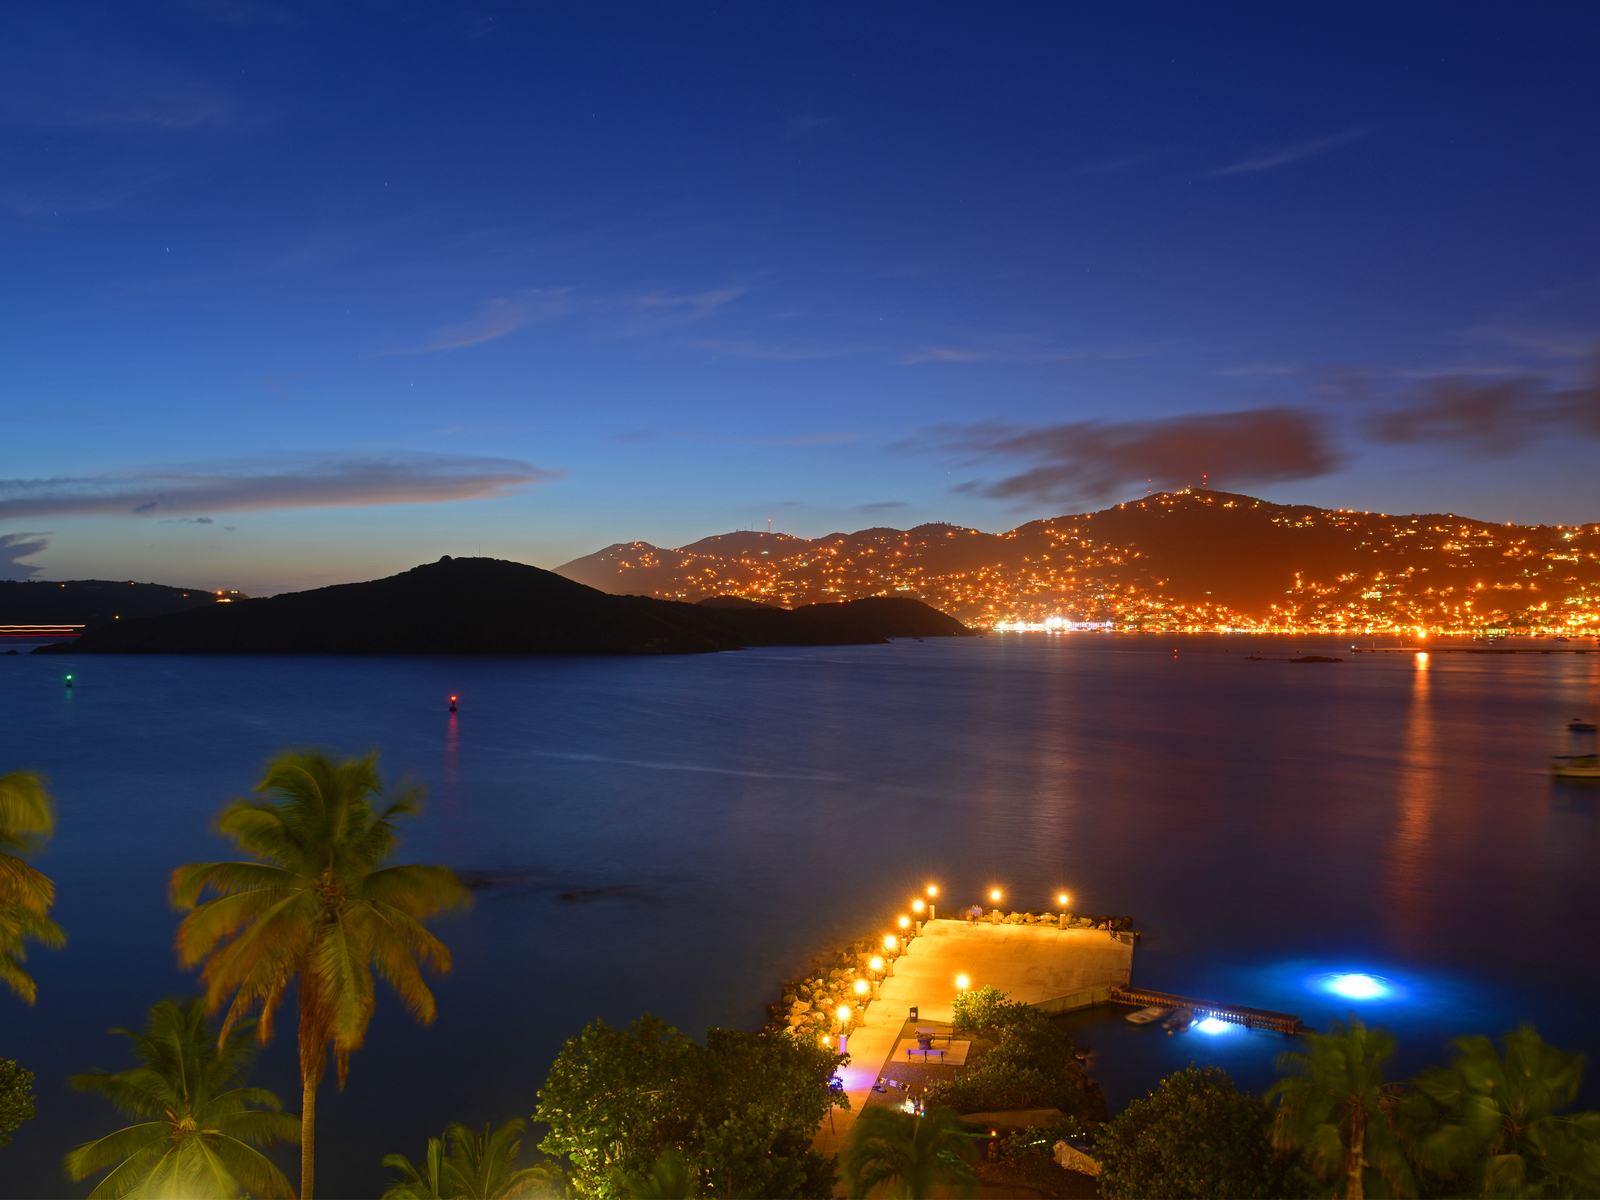 For a piece titled Is Saint Thomas Safe, a night photo of the bay with the hills lit up